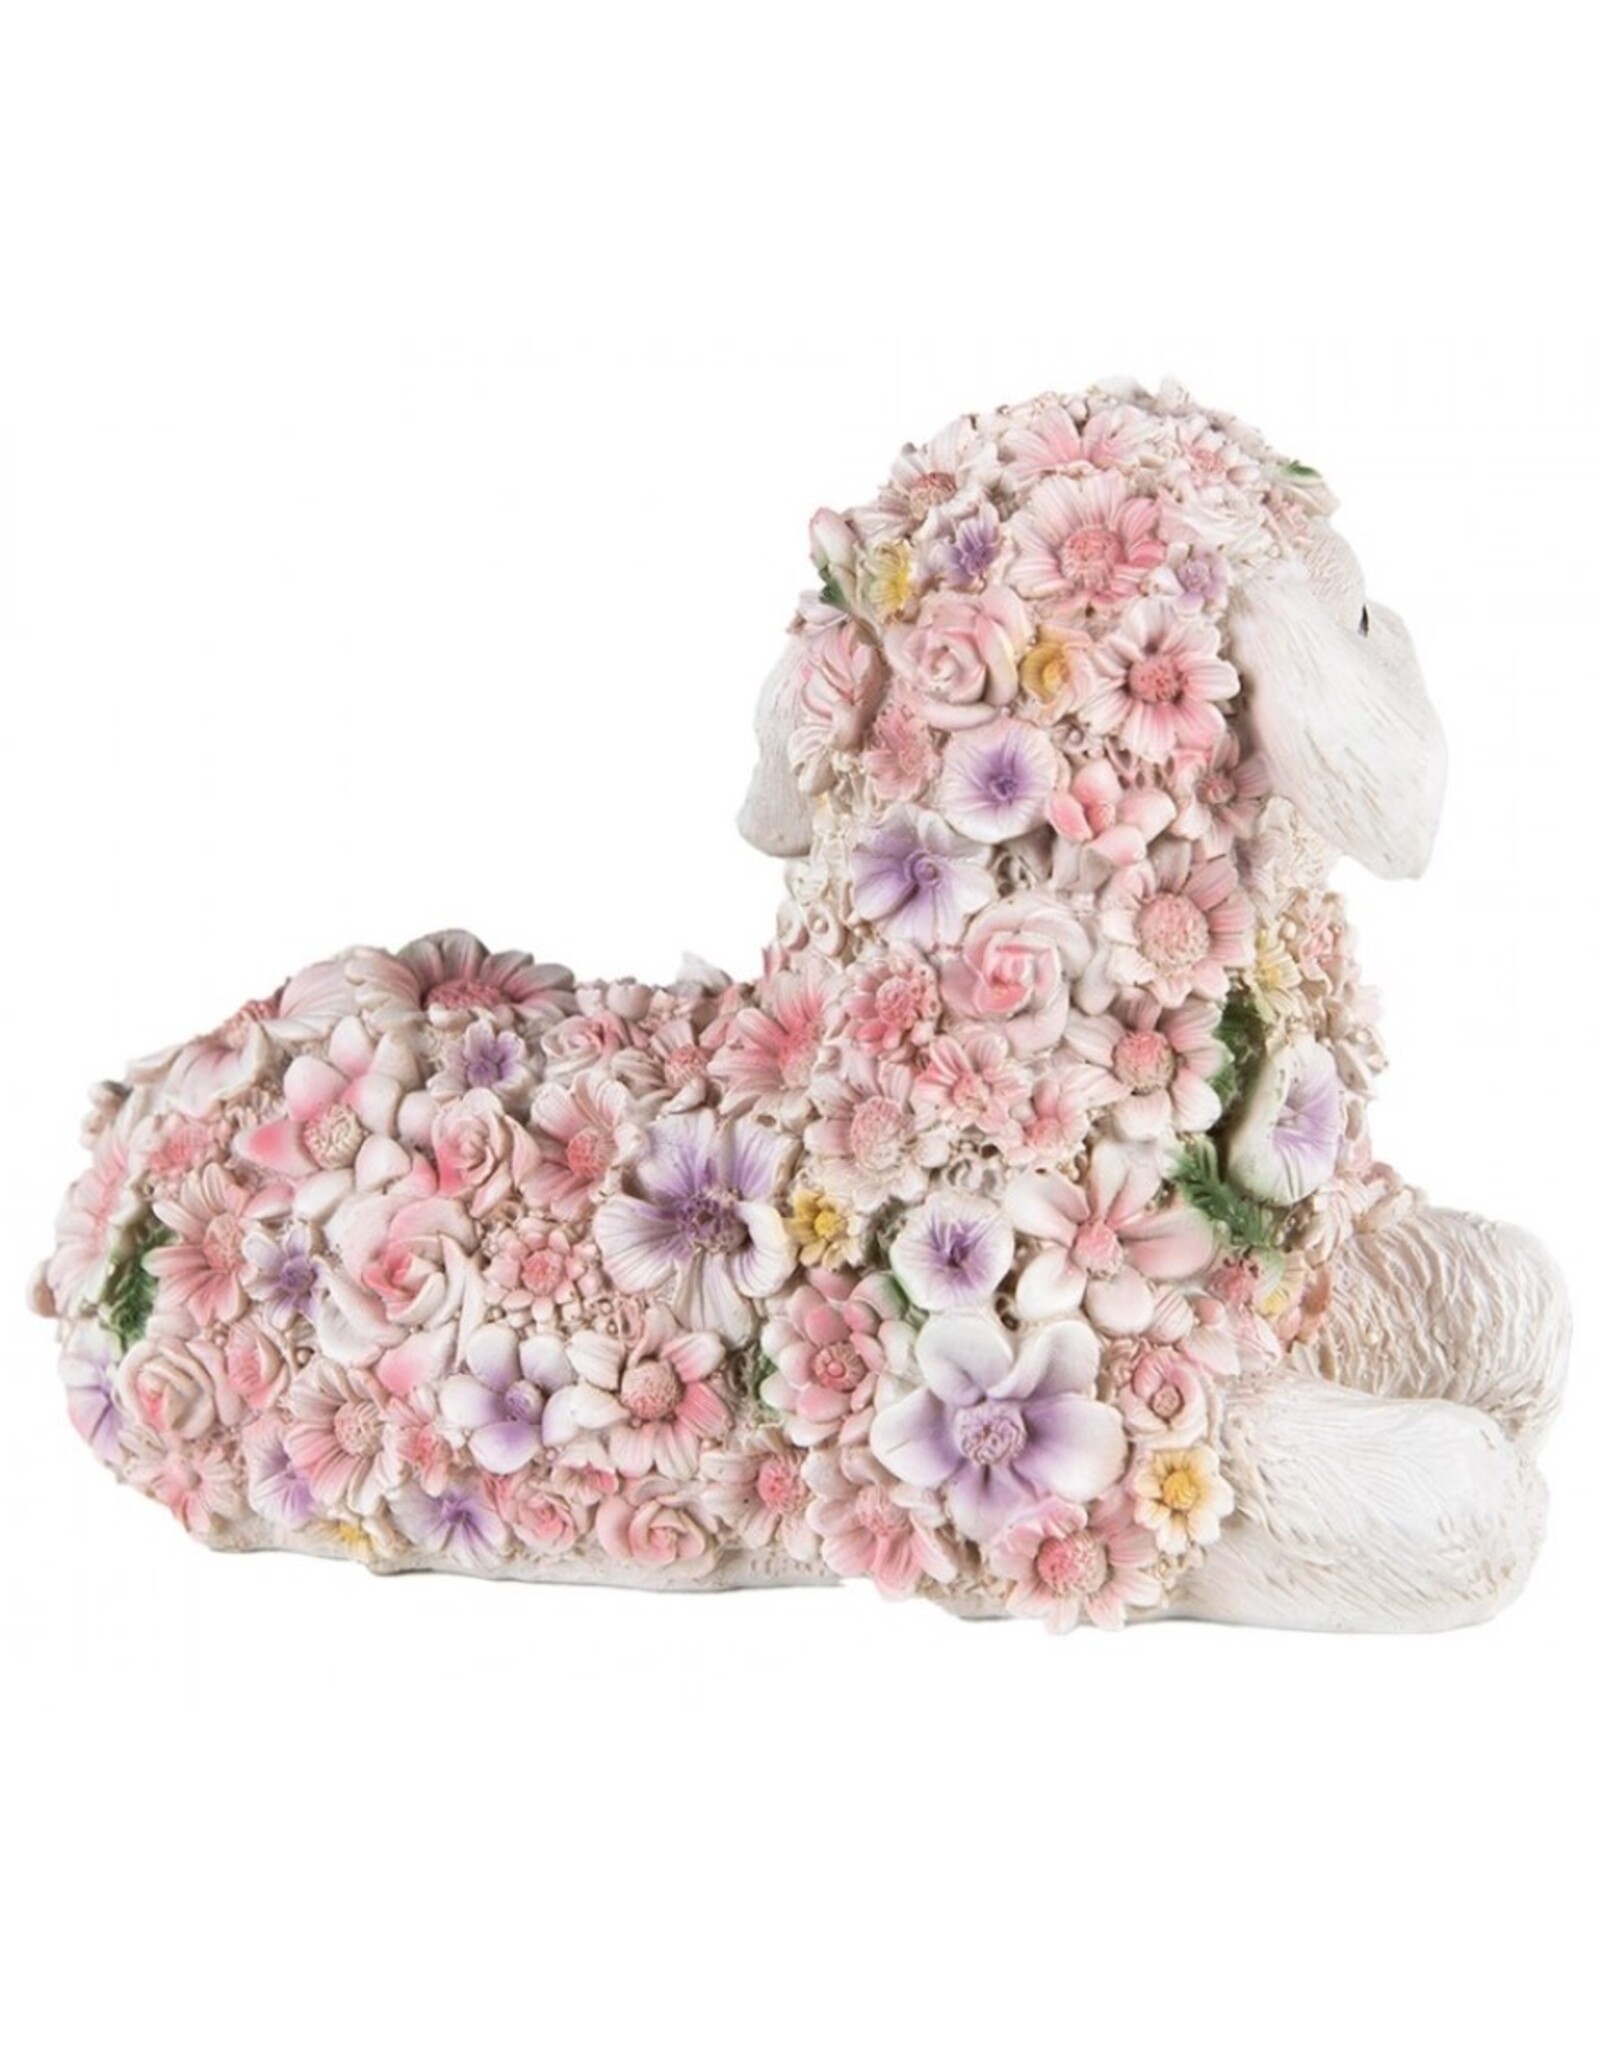 C&E Giftware & Lifestyle - Lying Sheep Decorated with Pink Flowers figurine